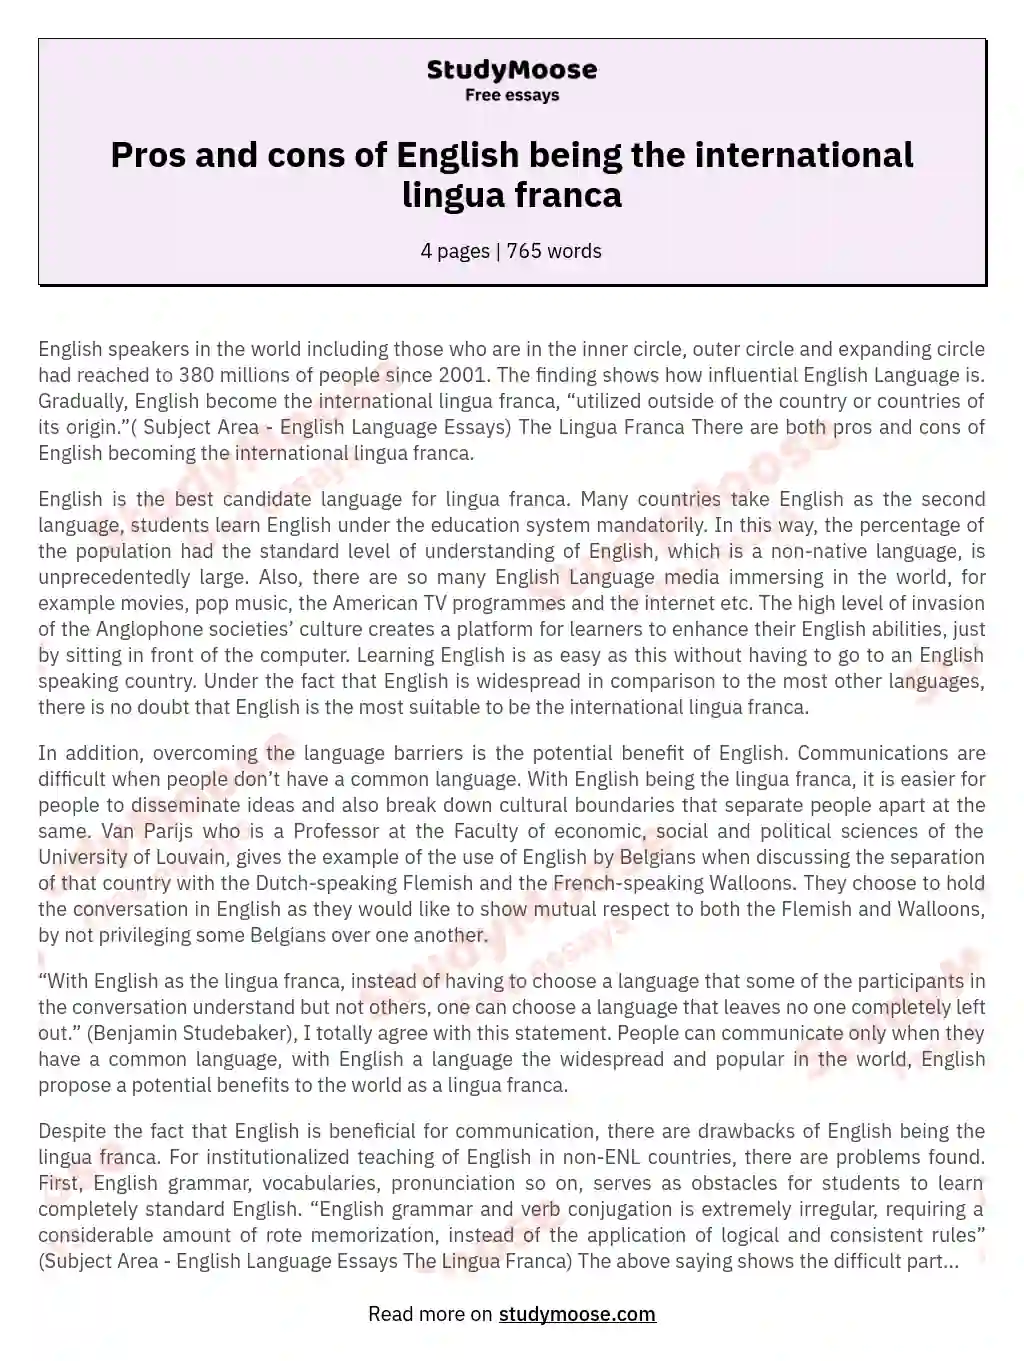 Pros and cons of English being the international lingua franca essay